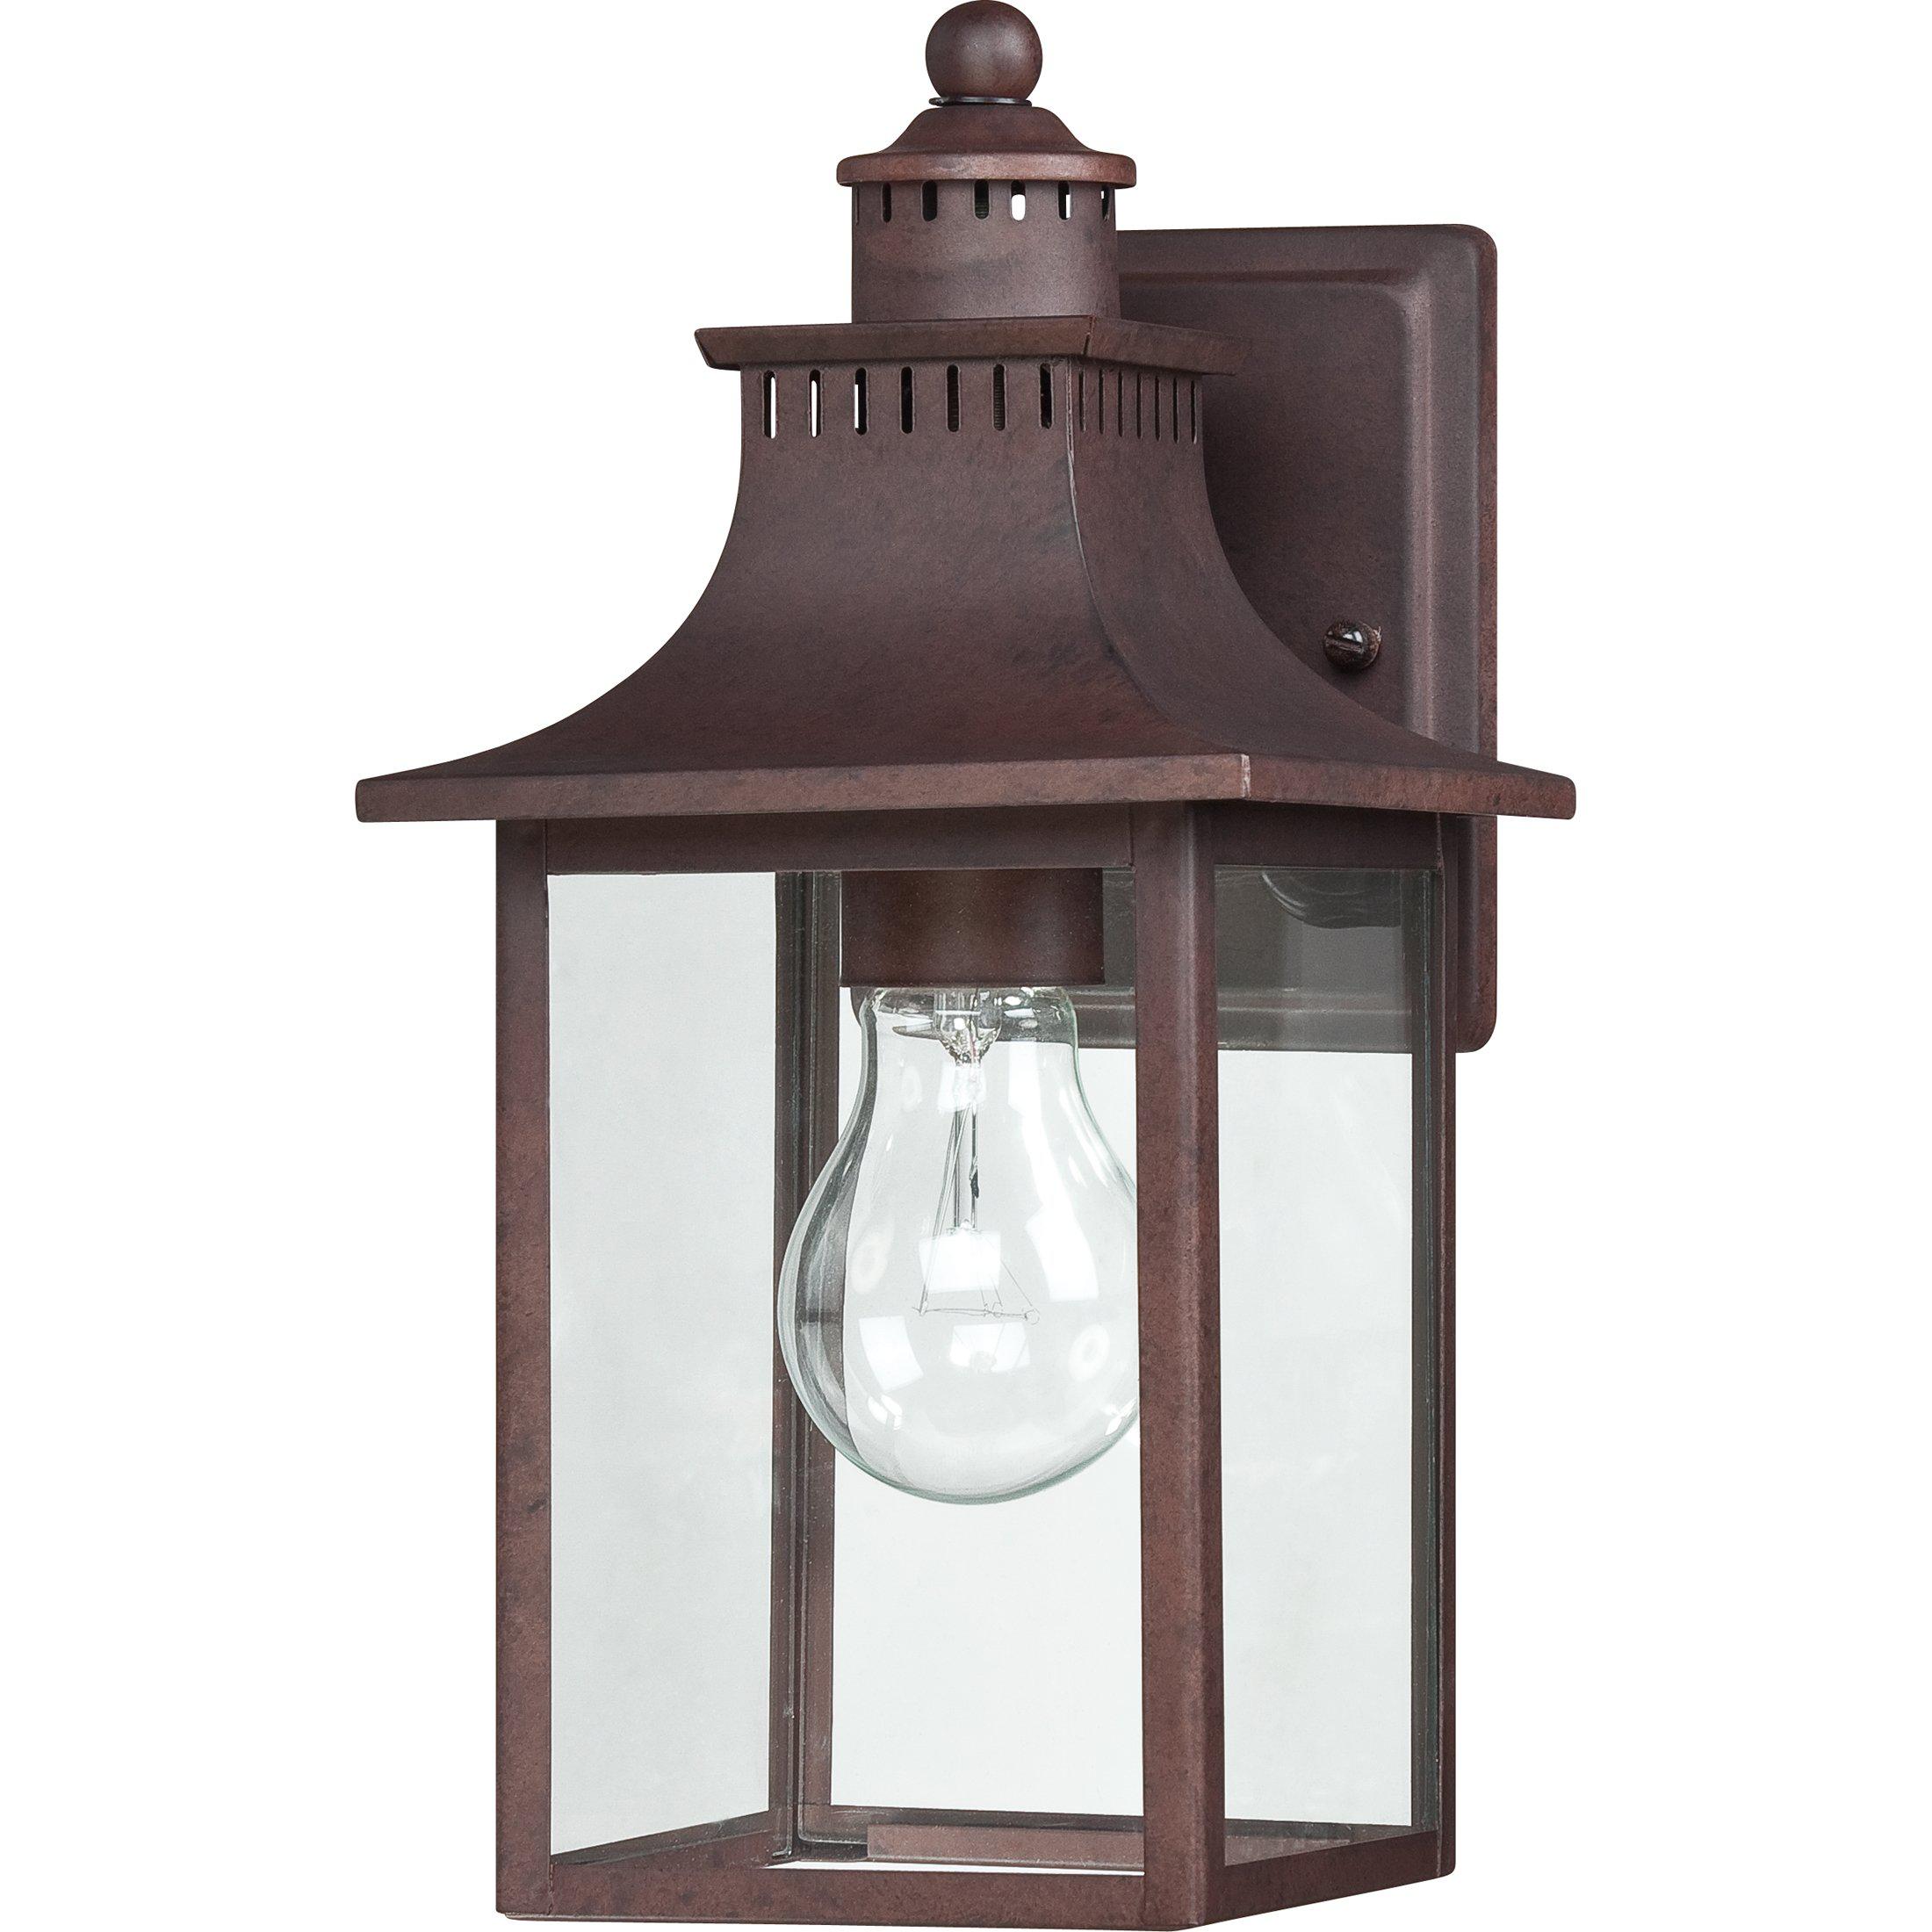 Quoizel  Chancellor Outdoor Lantern, Small Outdoor l Wall Quoizel   